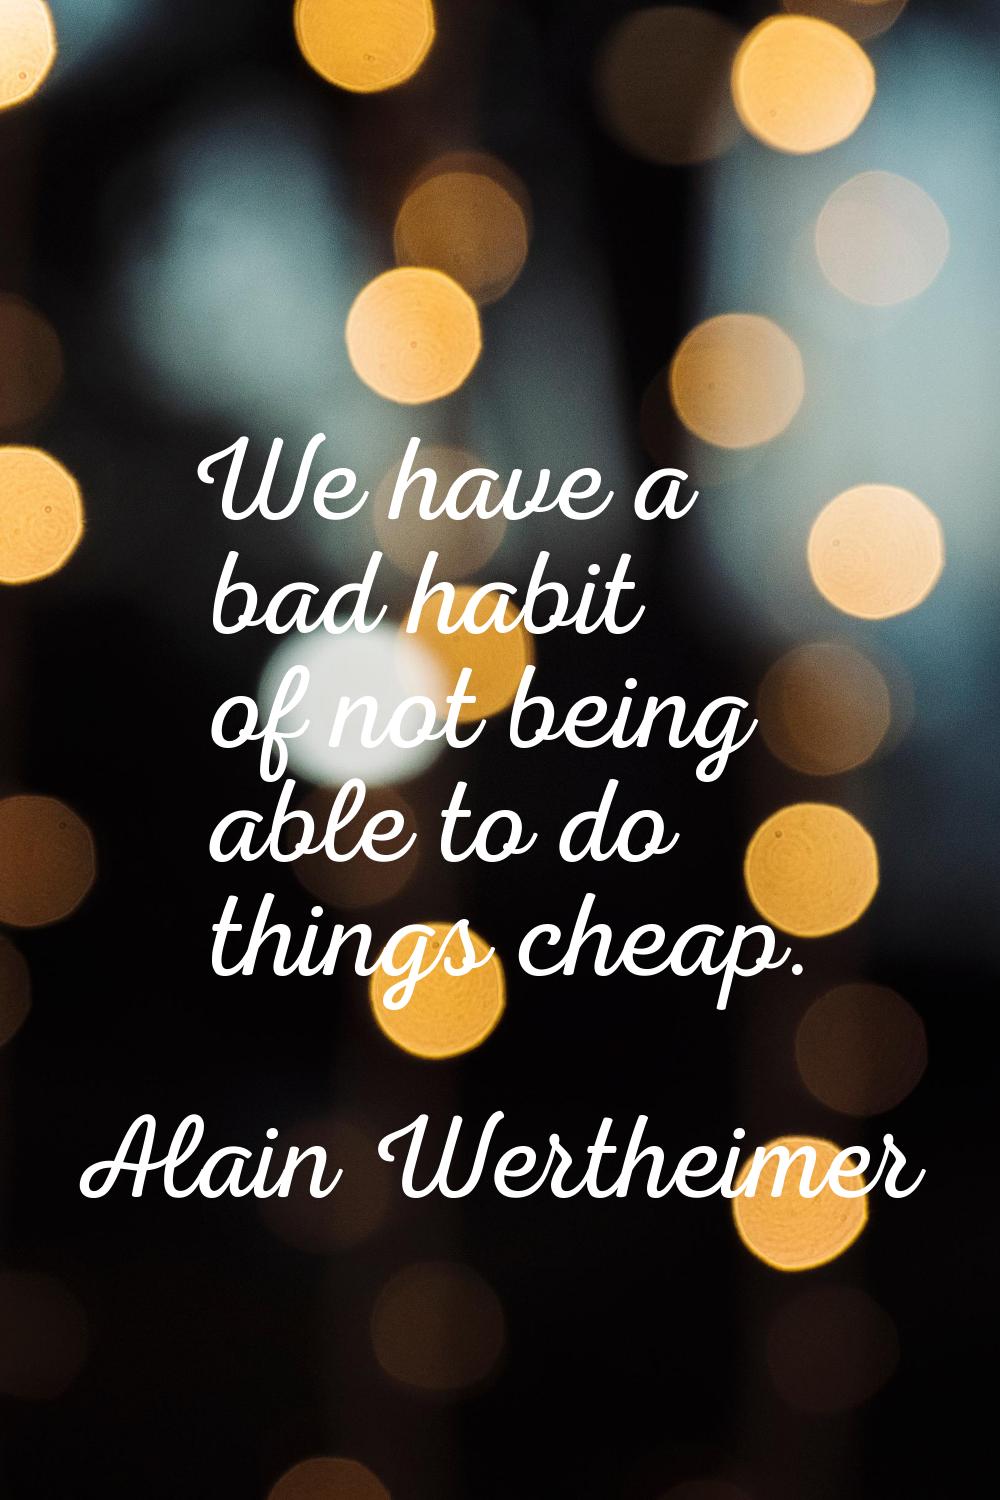 We have a bad habit of not being able to do things cheap.